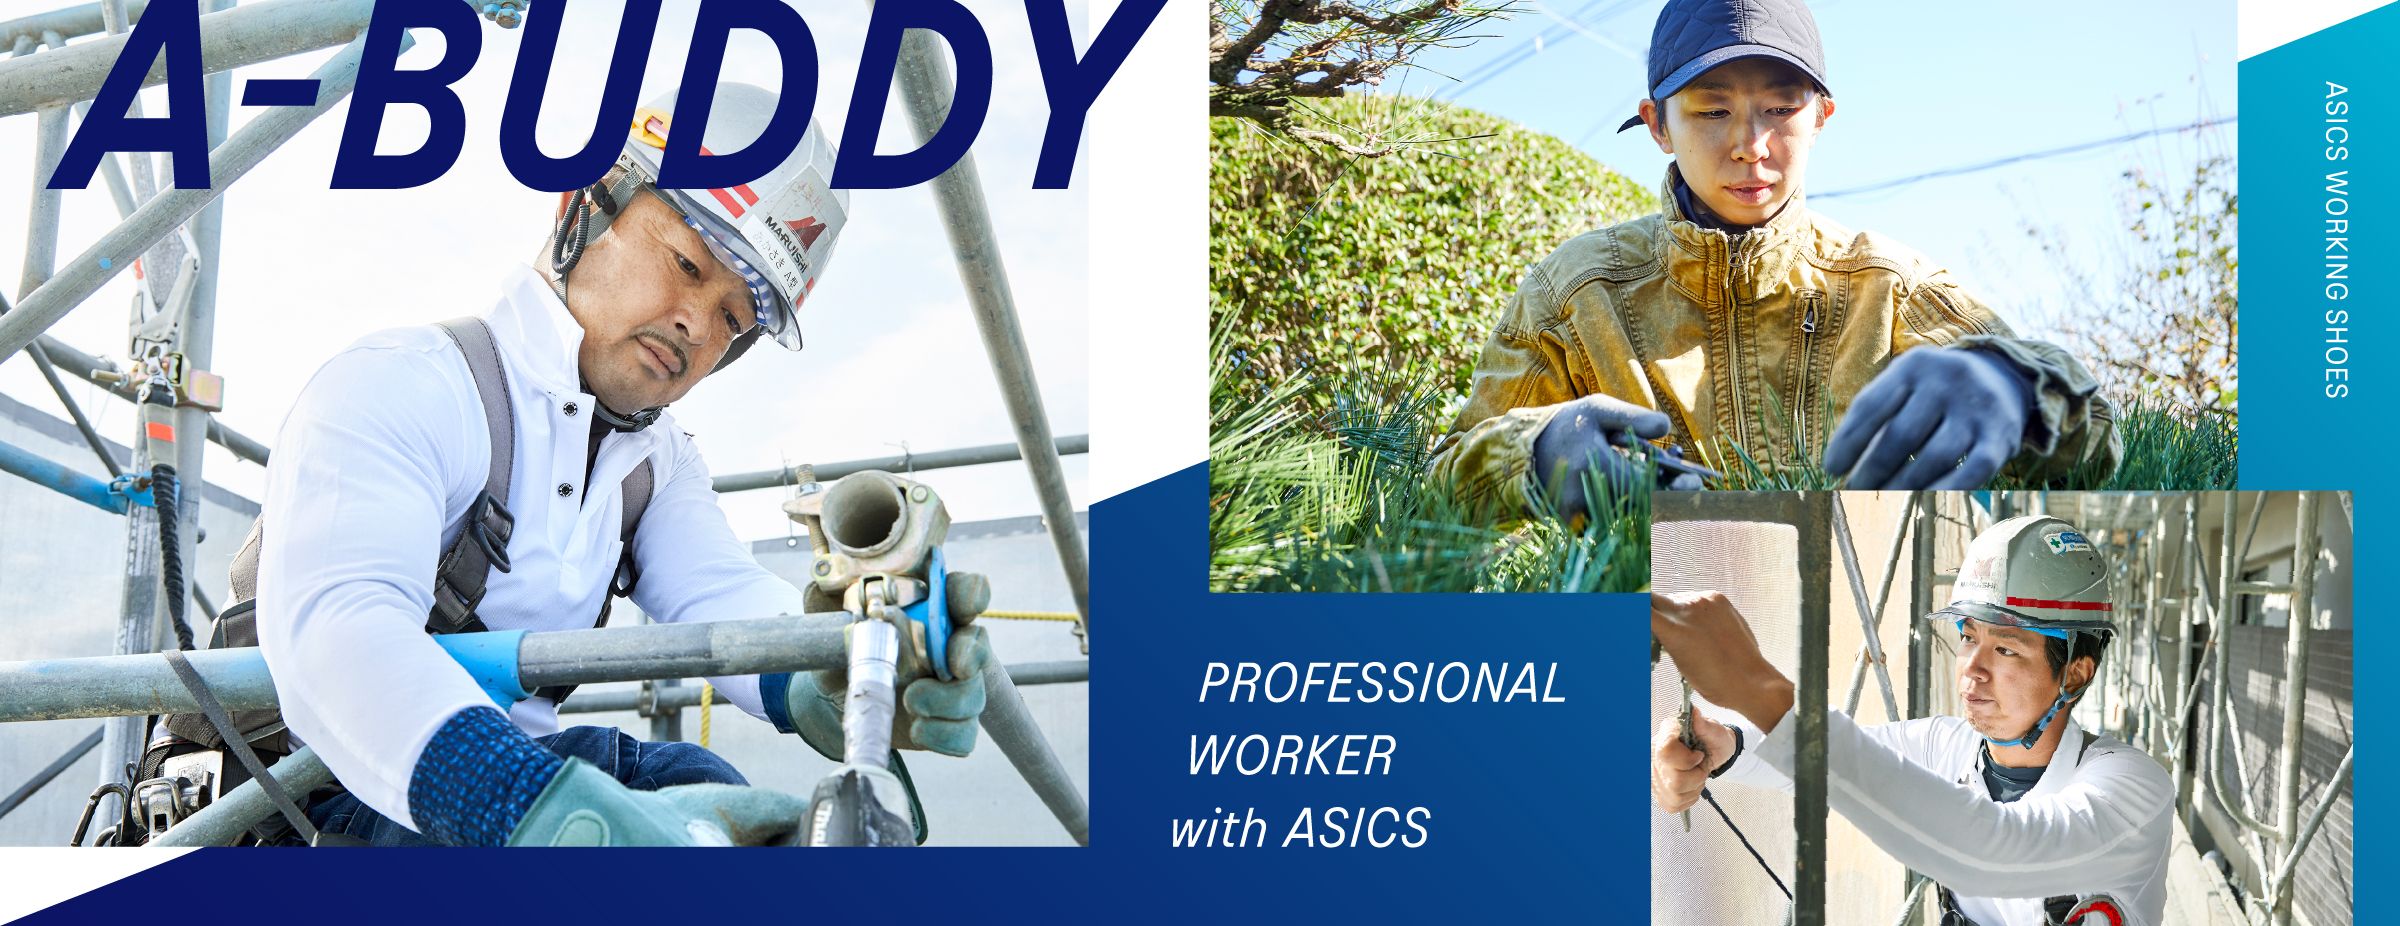 A-BUDDY vol.11 PROFESSIONAL WORKER with ASICS